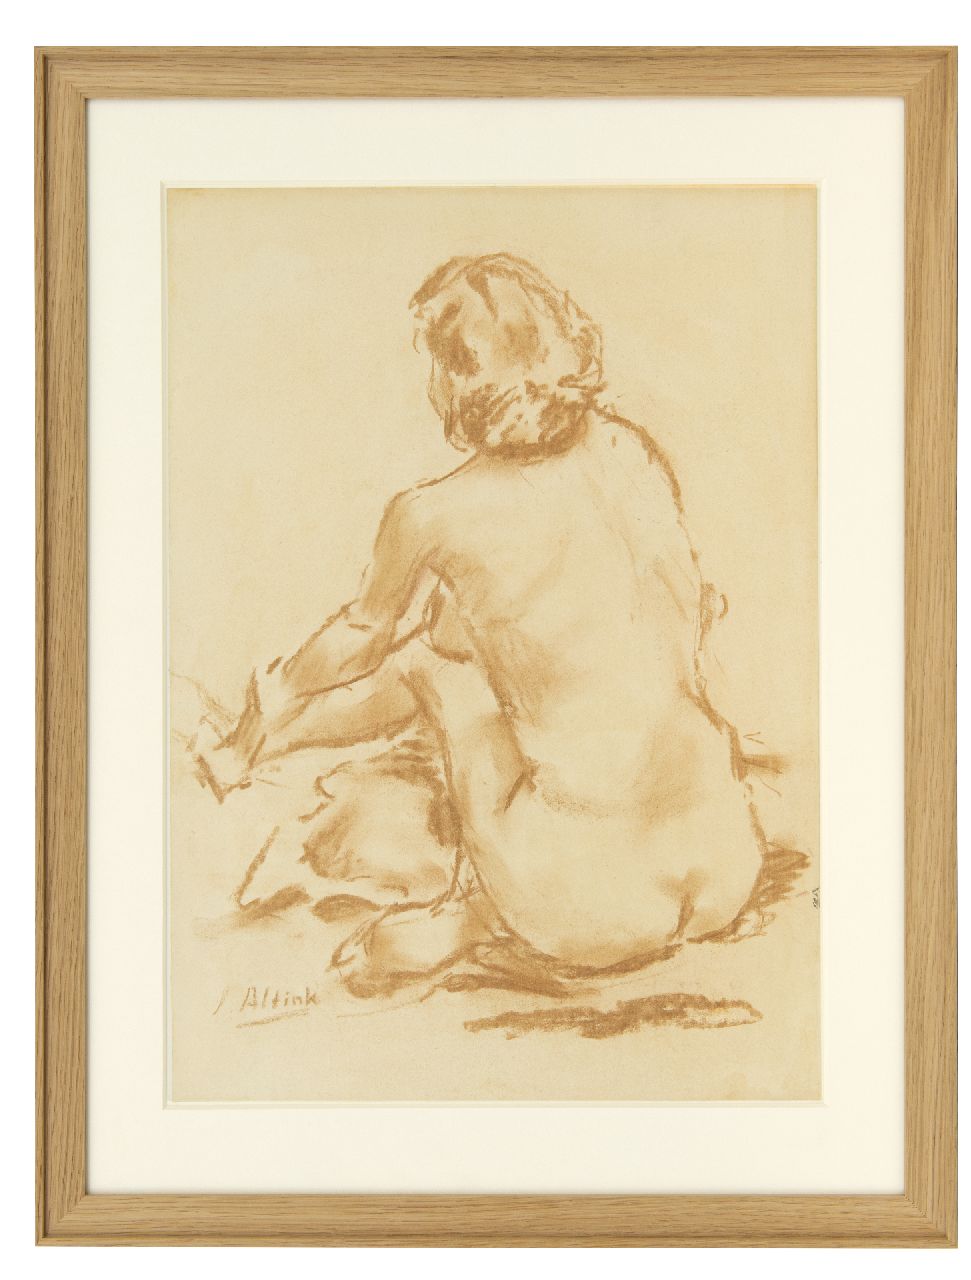 Altink J.  | Jan Altink, Naked seen from the back, chalk on paper 46.0 x 33.0 cm, signed l.l.